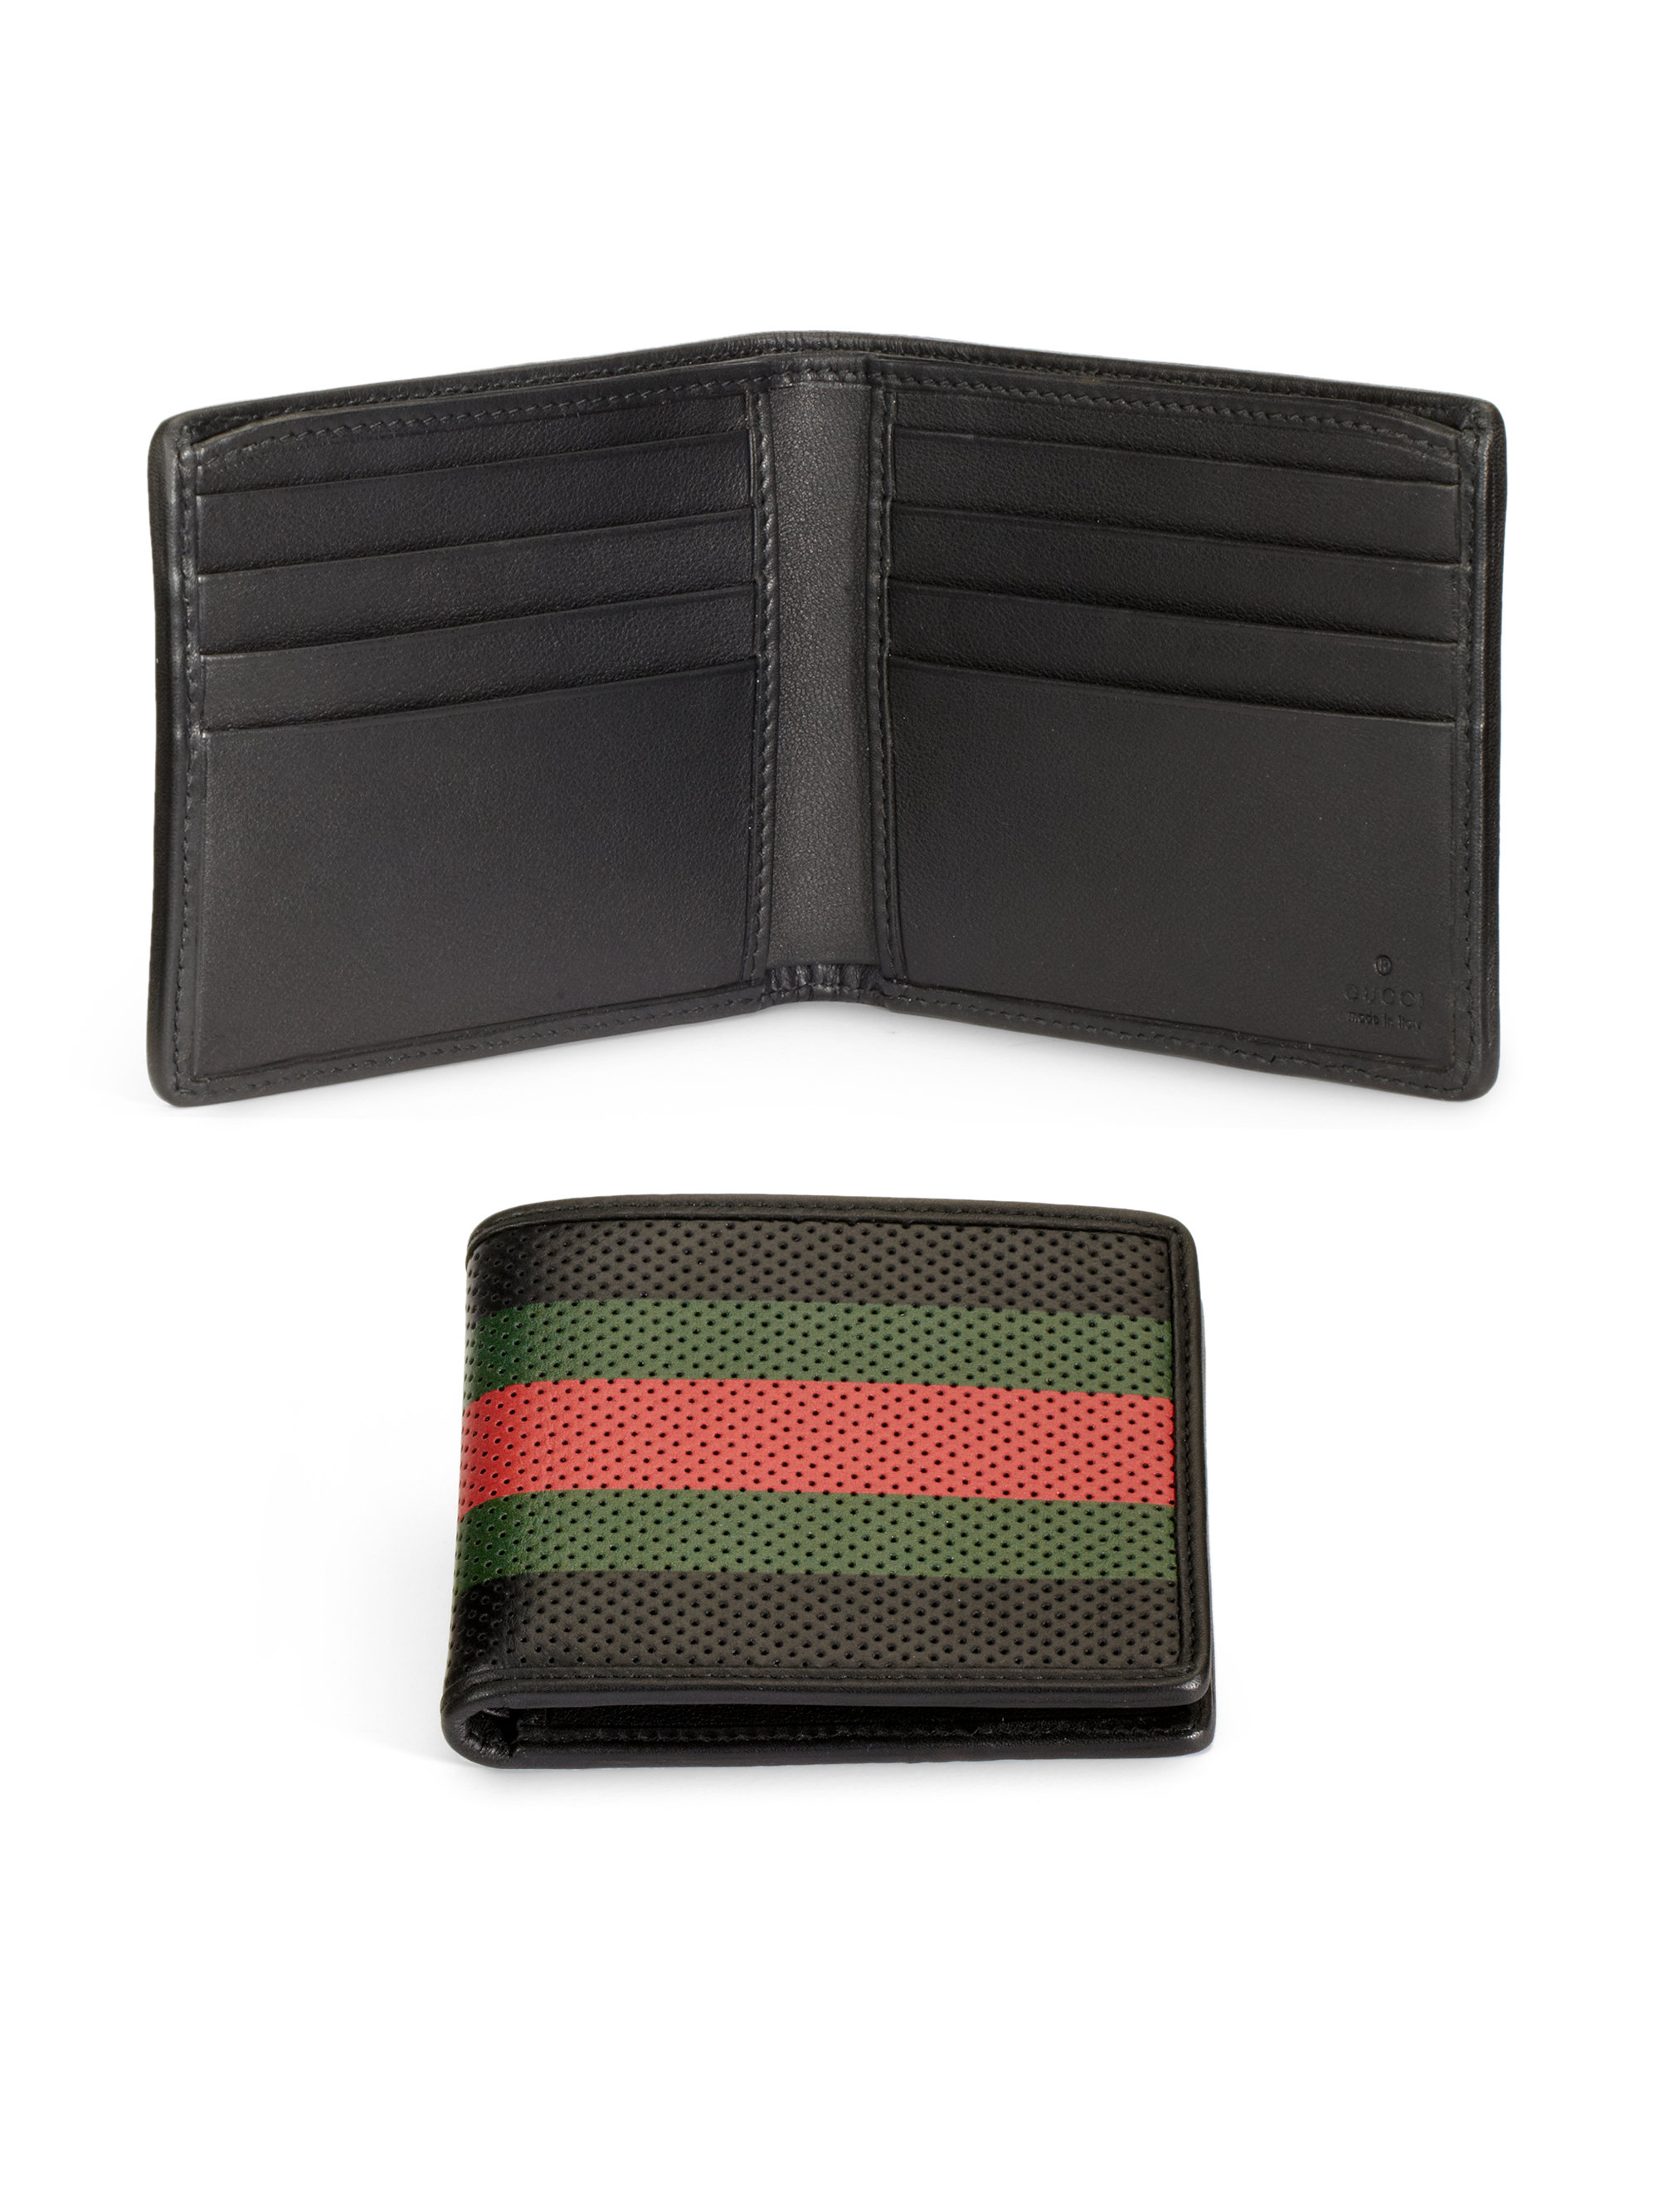 Gucci Perforated Wallet in Black for Men - Lyst